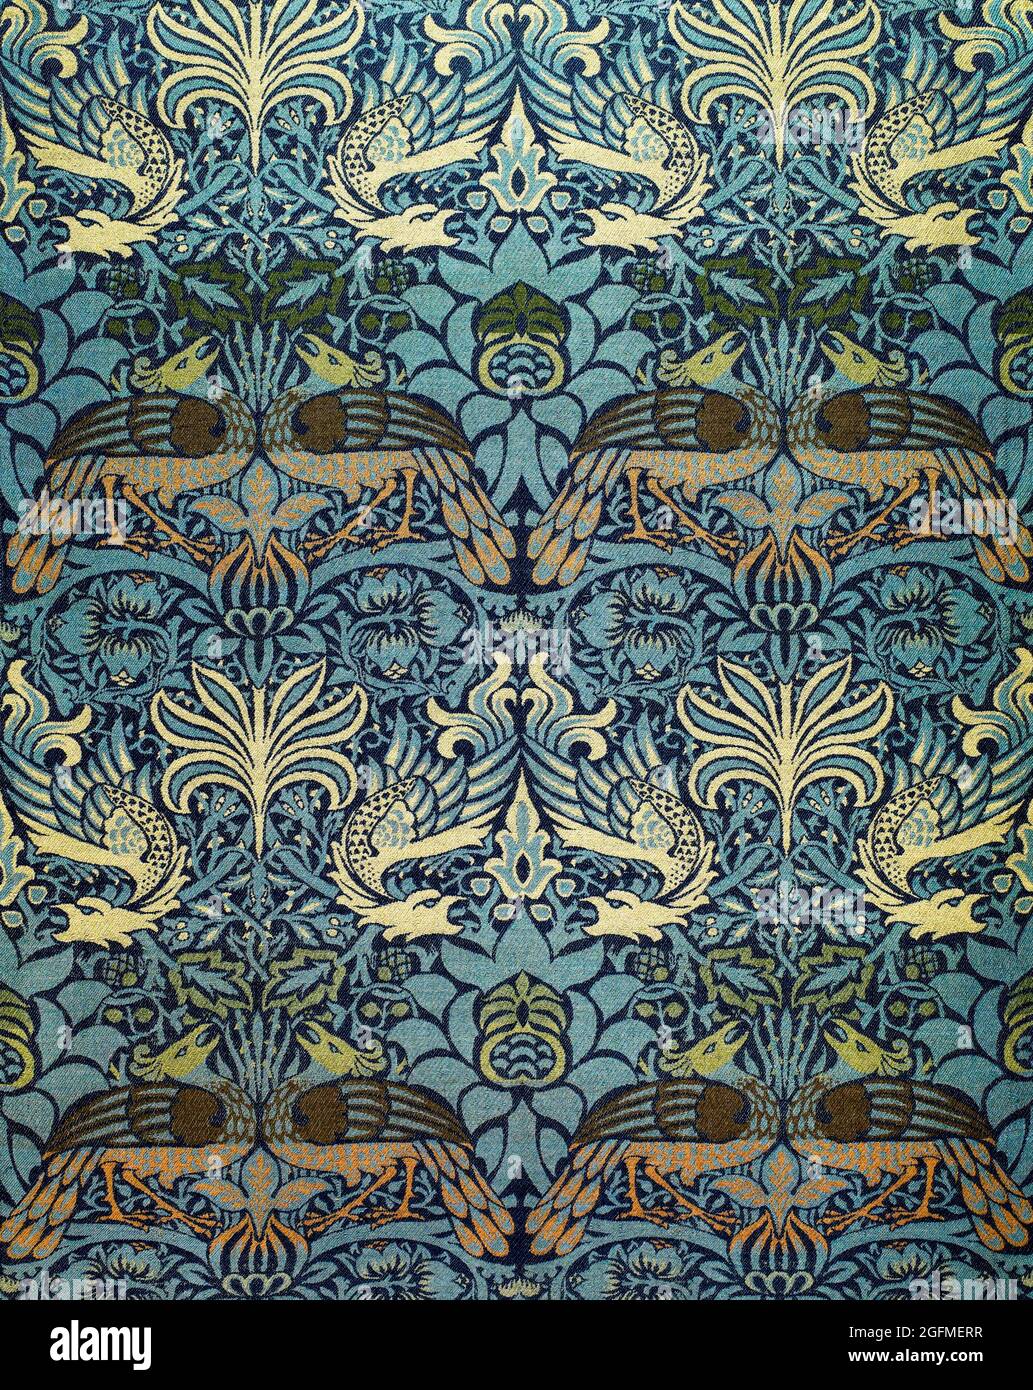 Woven woollen fabric: Peacock and Dragon by William Morris Stock Photo ...